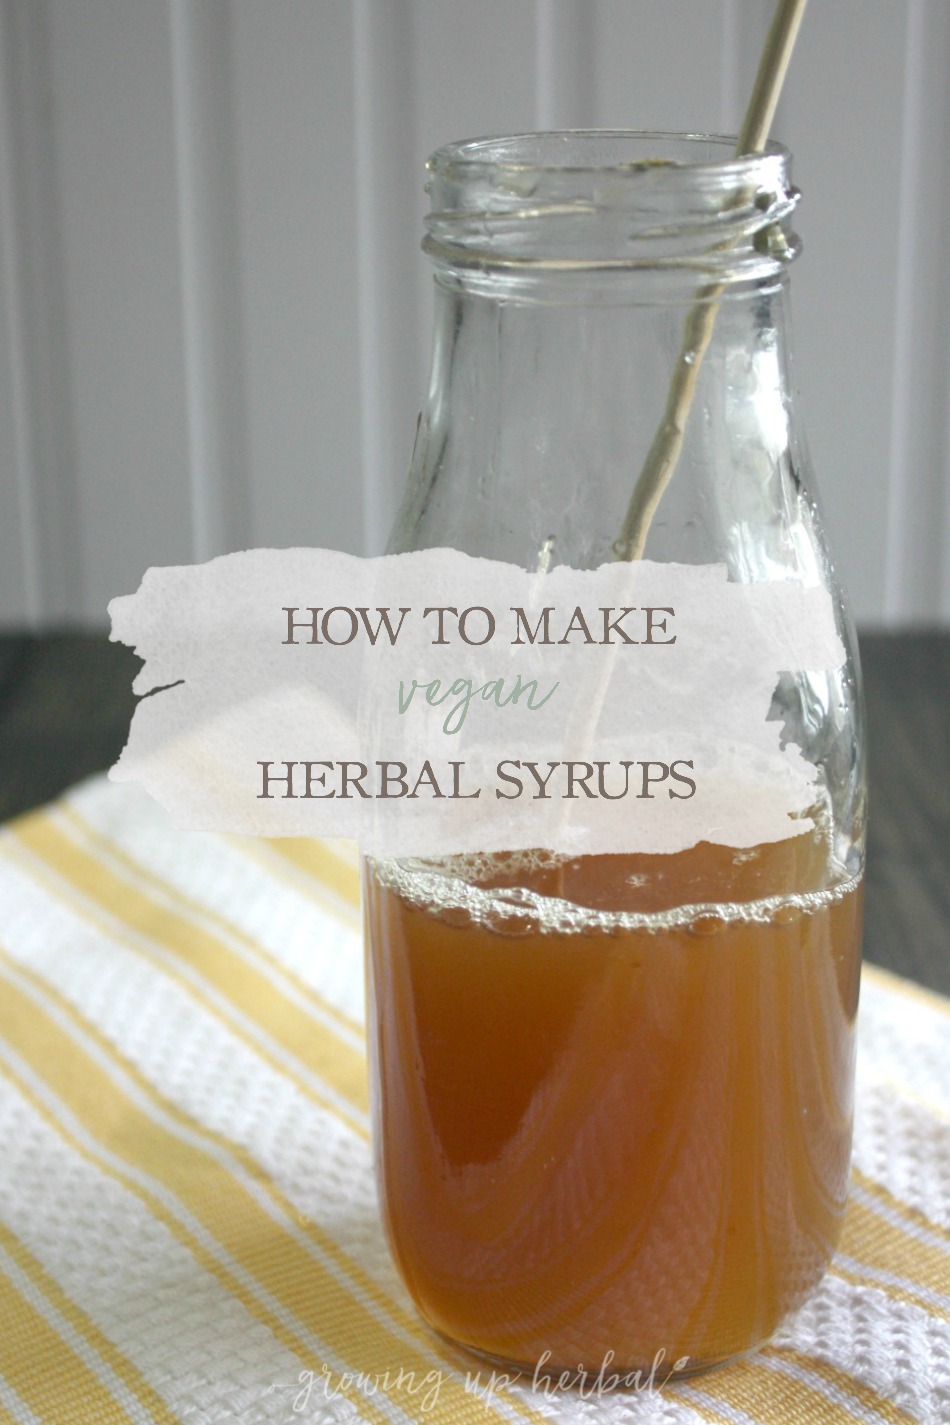 How To Make Vegan Herbal Syrup | Growing Up Herbal | If you’re a vegan and are interested in making vegan herbal syrups, you’ll find several alternatives to honey detailed in this article.